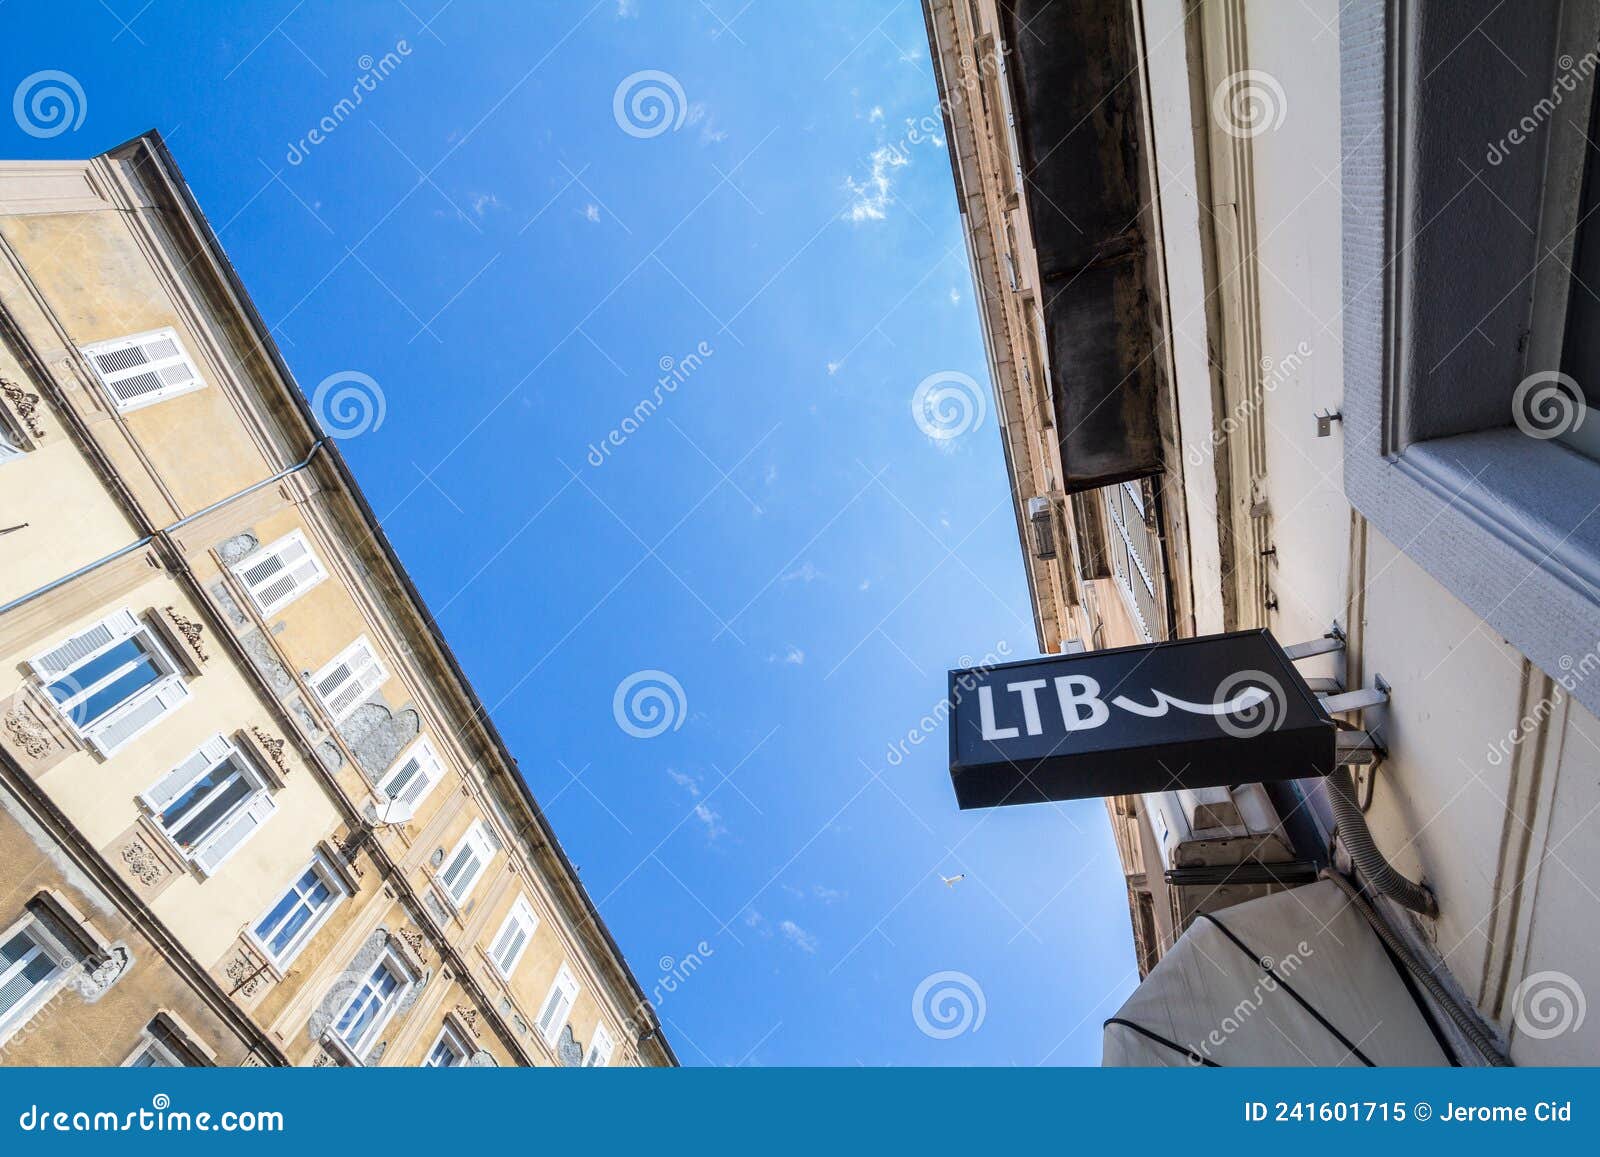 LTB Jeans Logo on Their Local Retailer in Ljubljana. Editorial Image ...